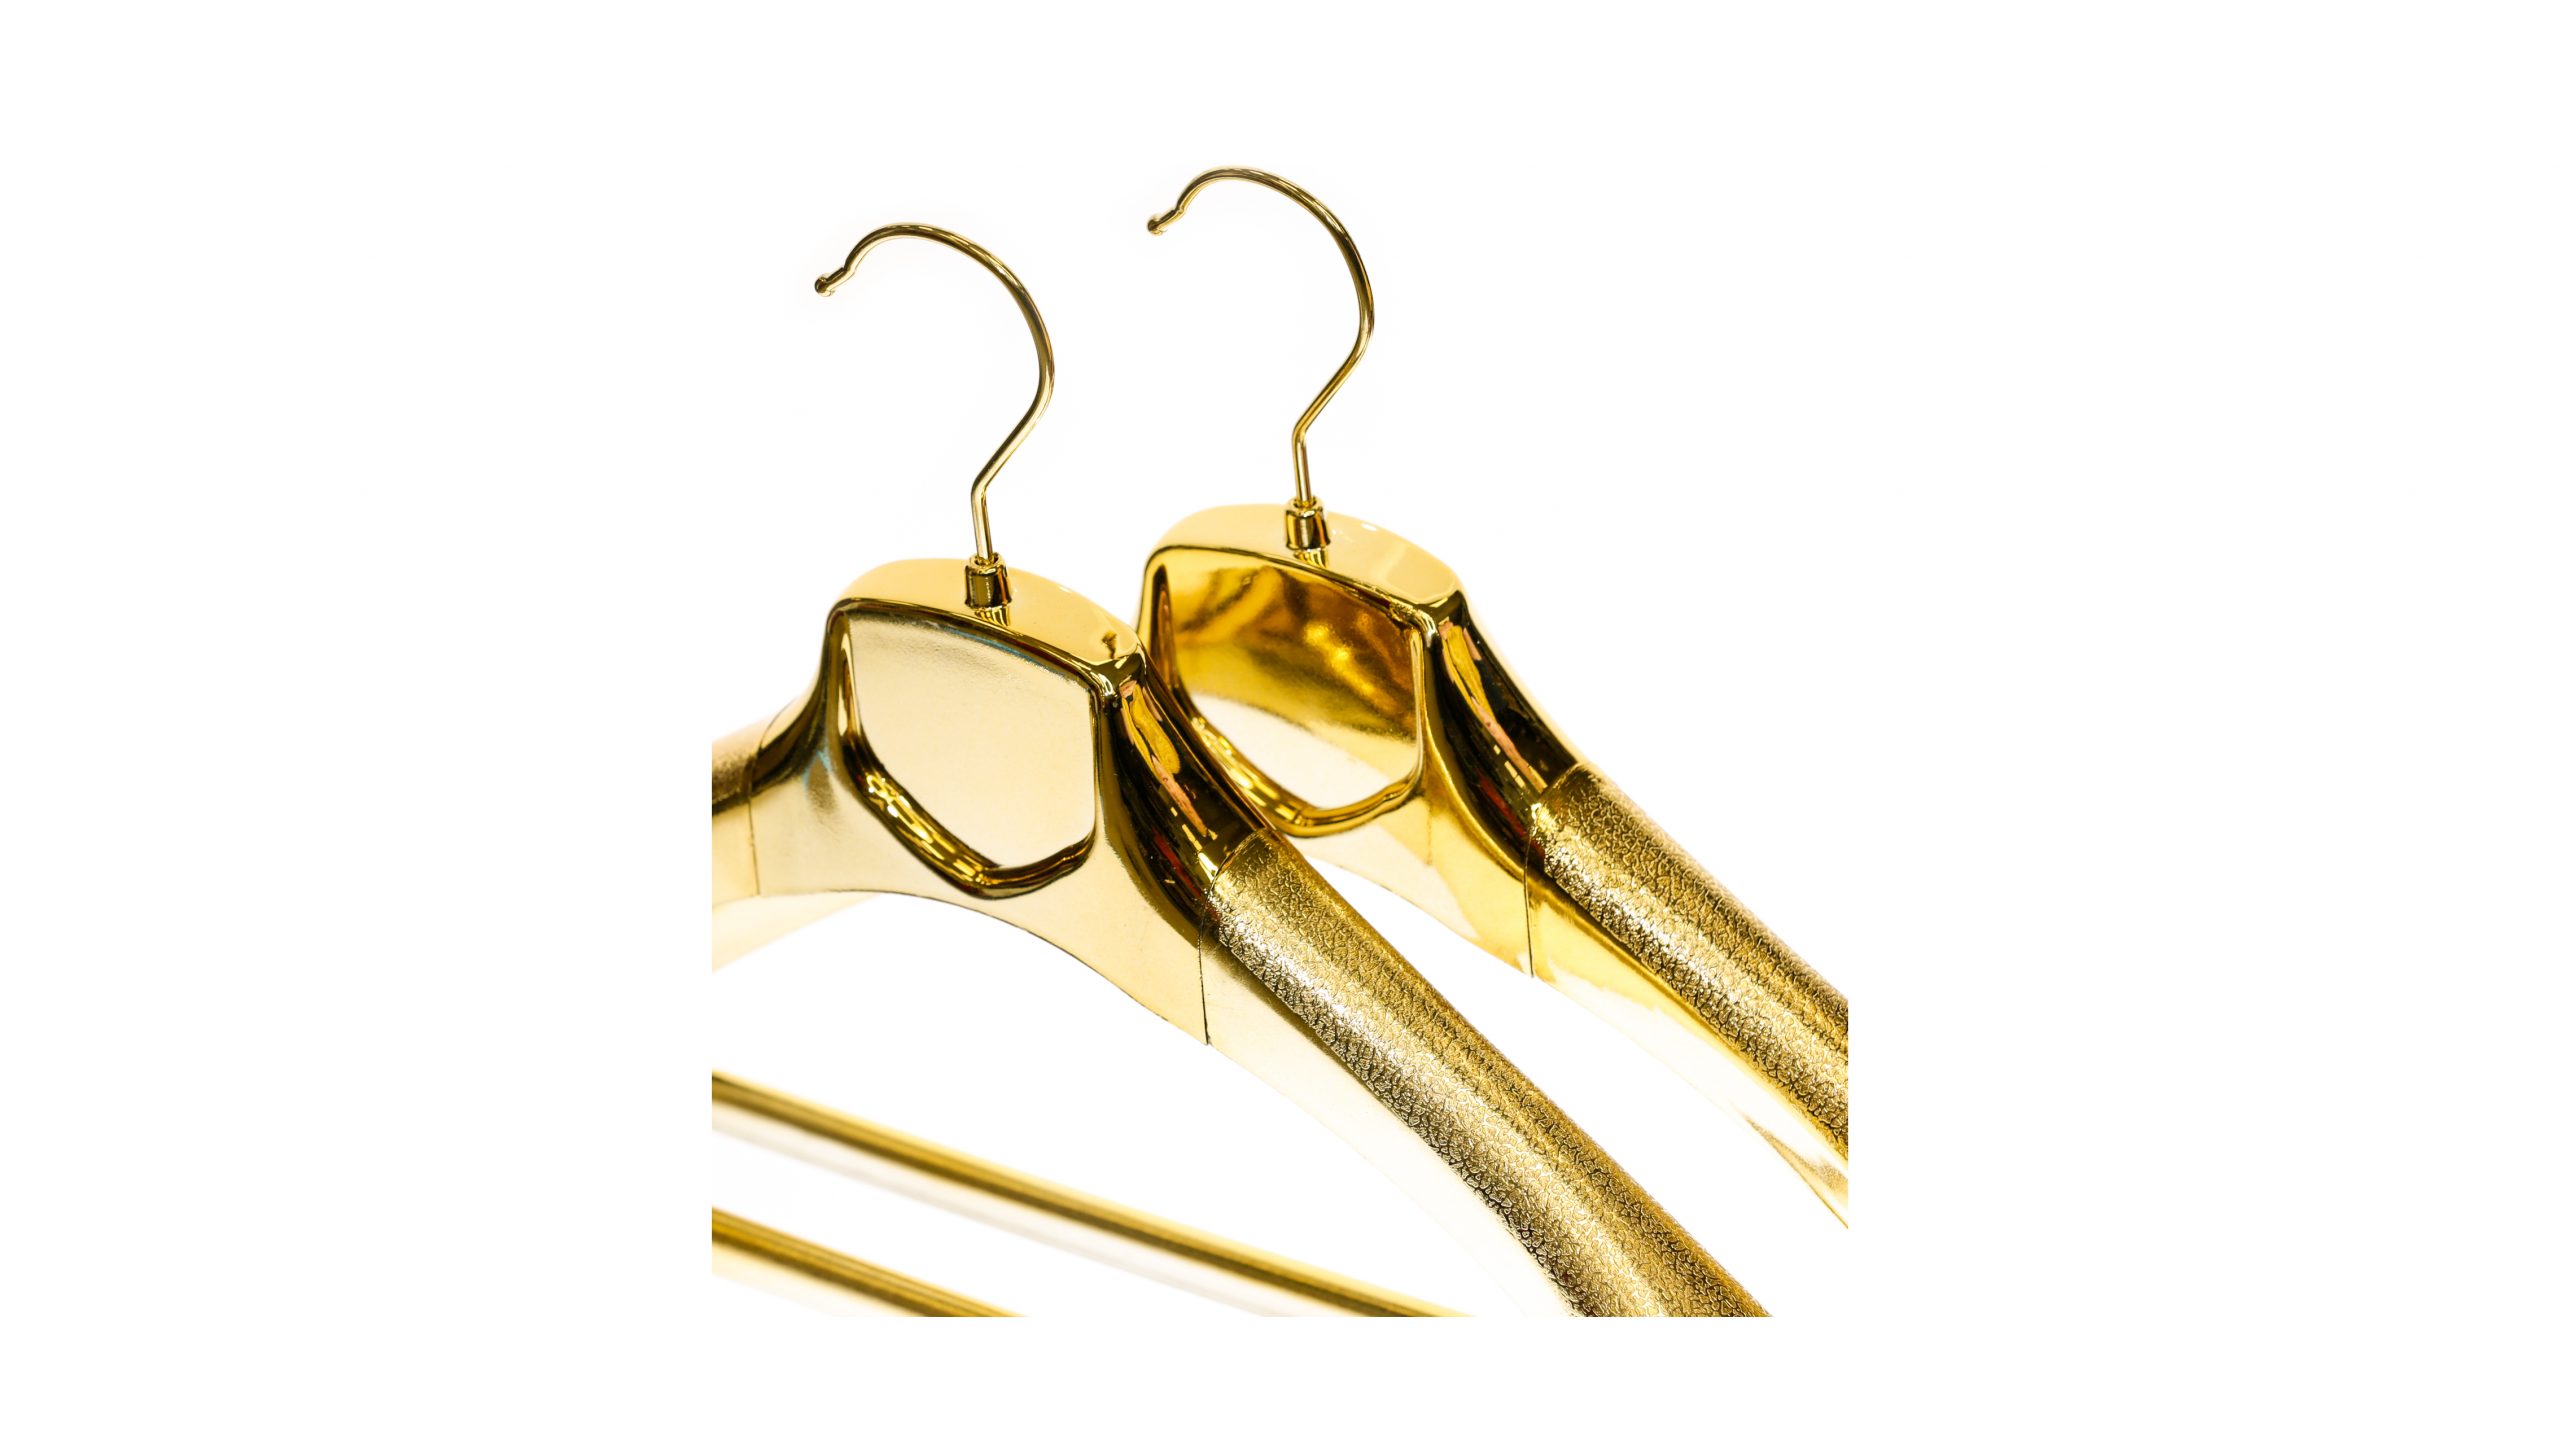 https://clothes-hangers.com/wp-content/uploads/2020/09/Gold-Hangers-with-Trouser-Bar-XL-3-scaled.jpg